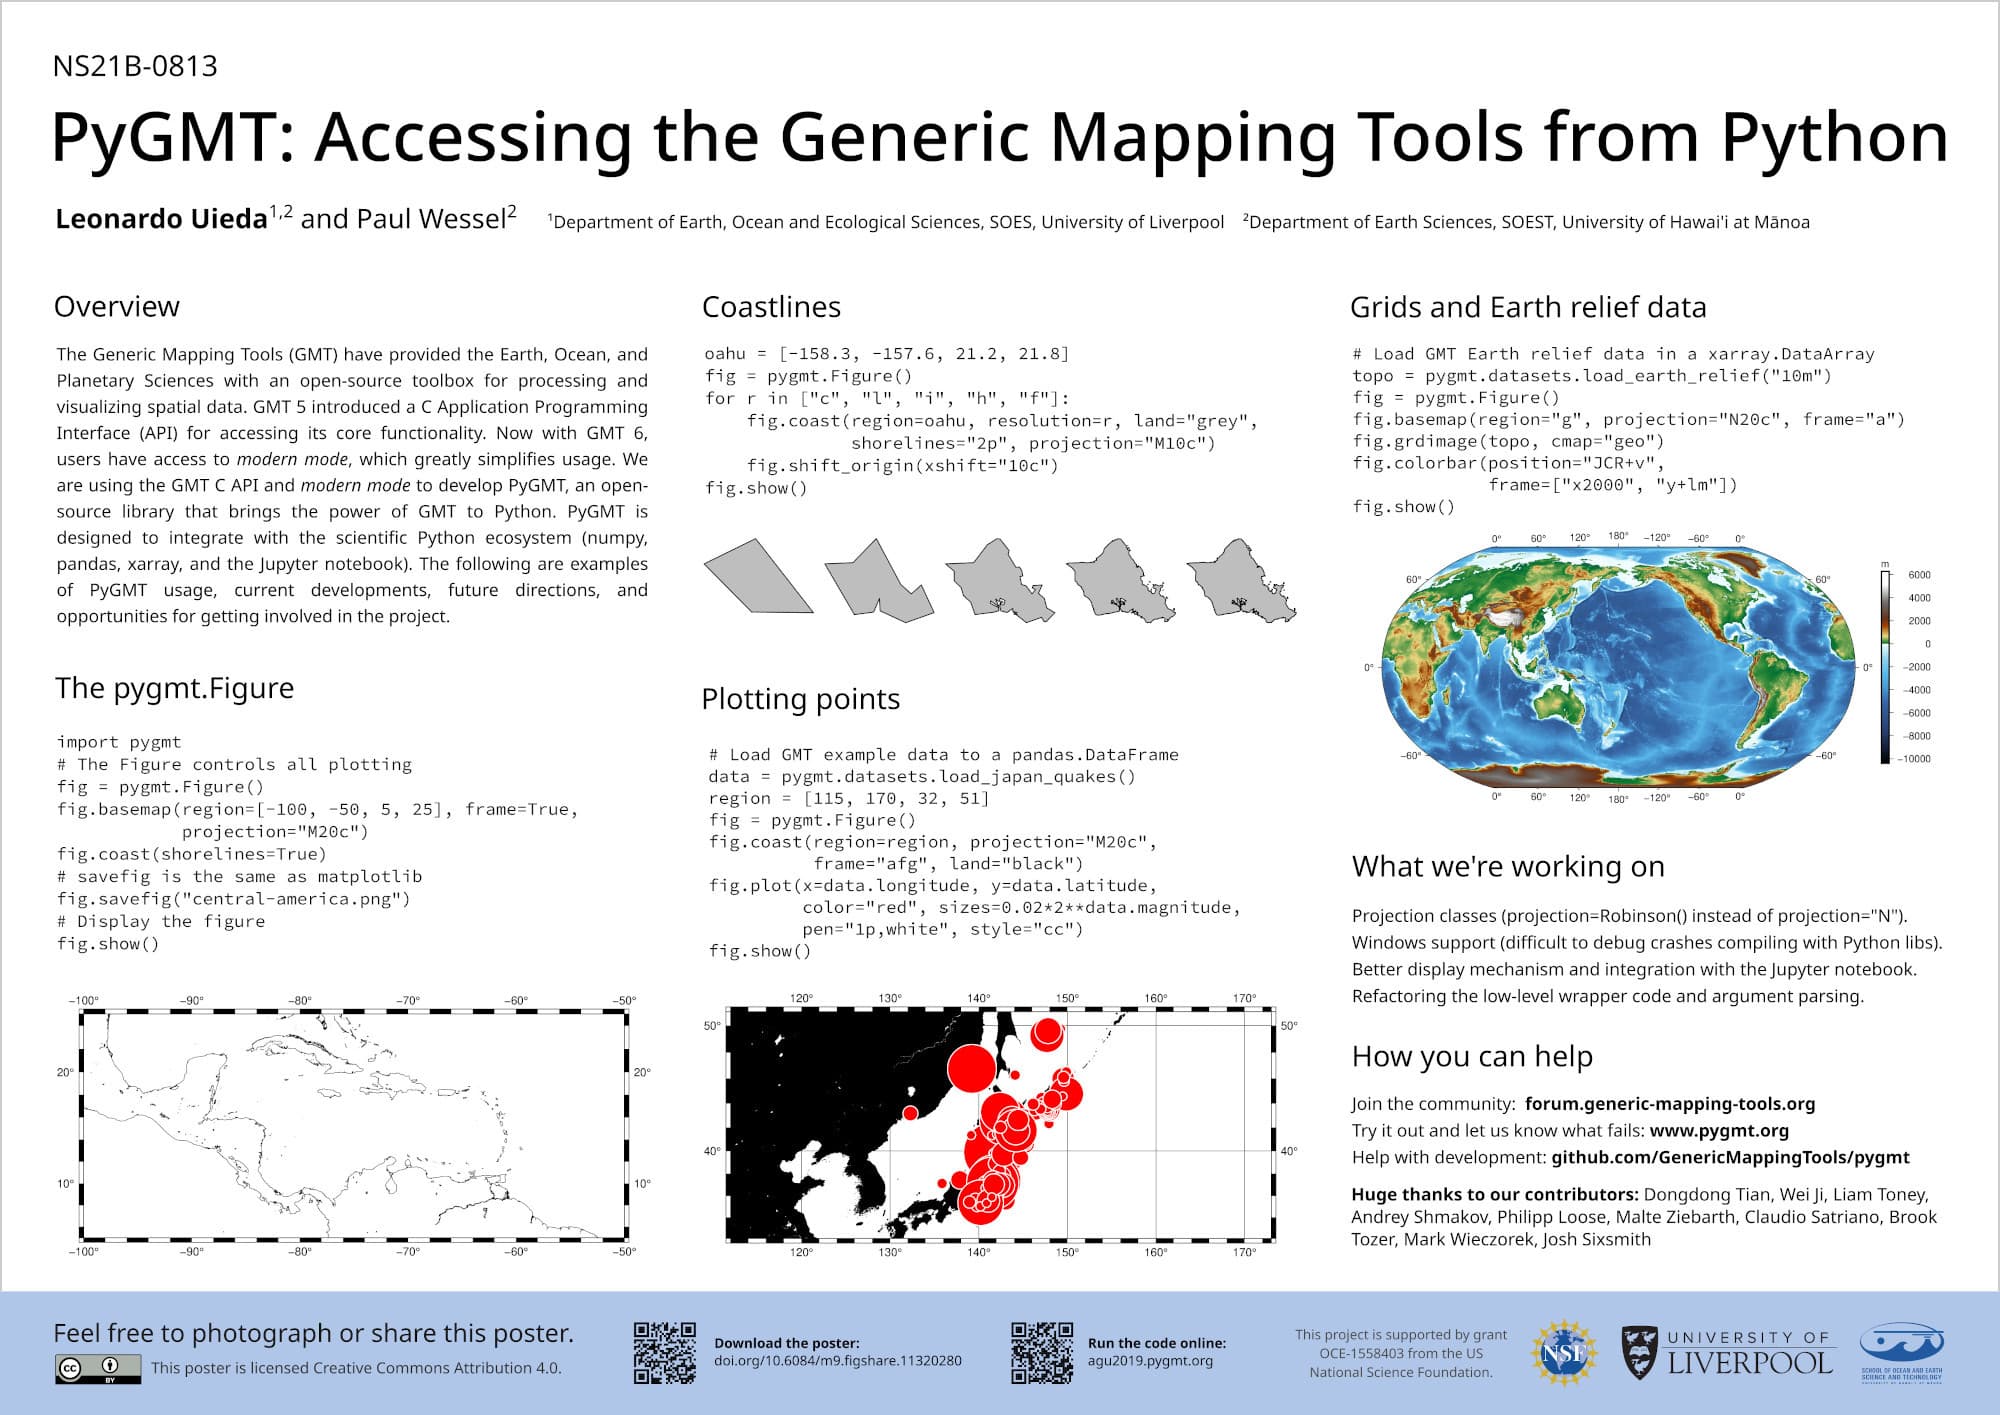 AGU 2019 poster on figshare